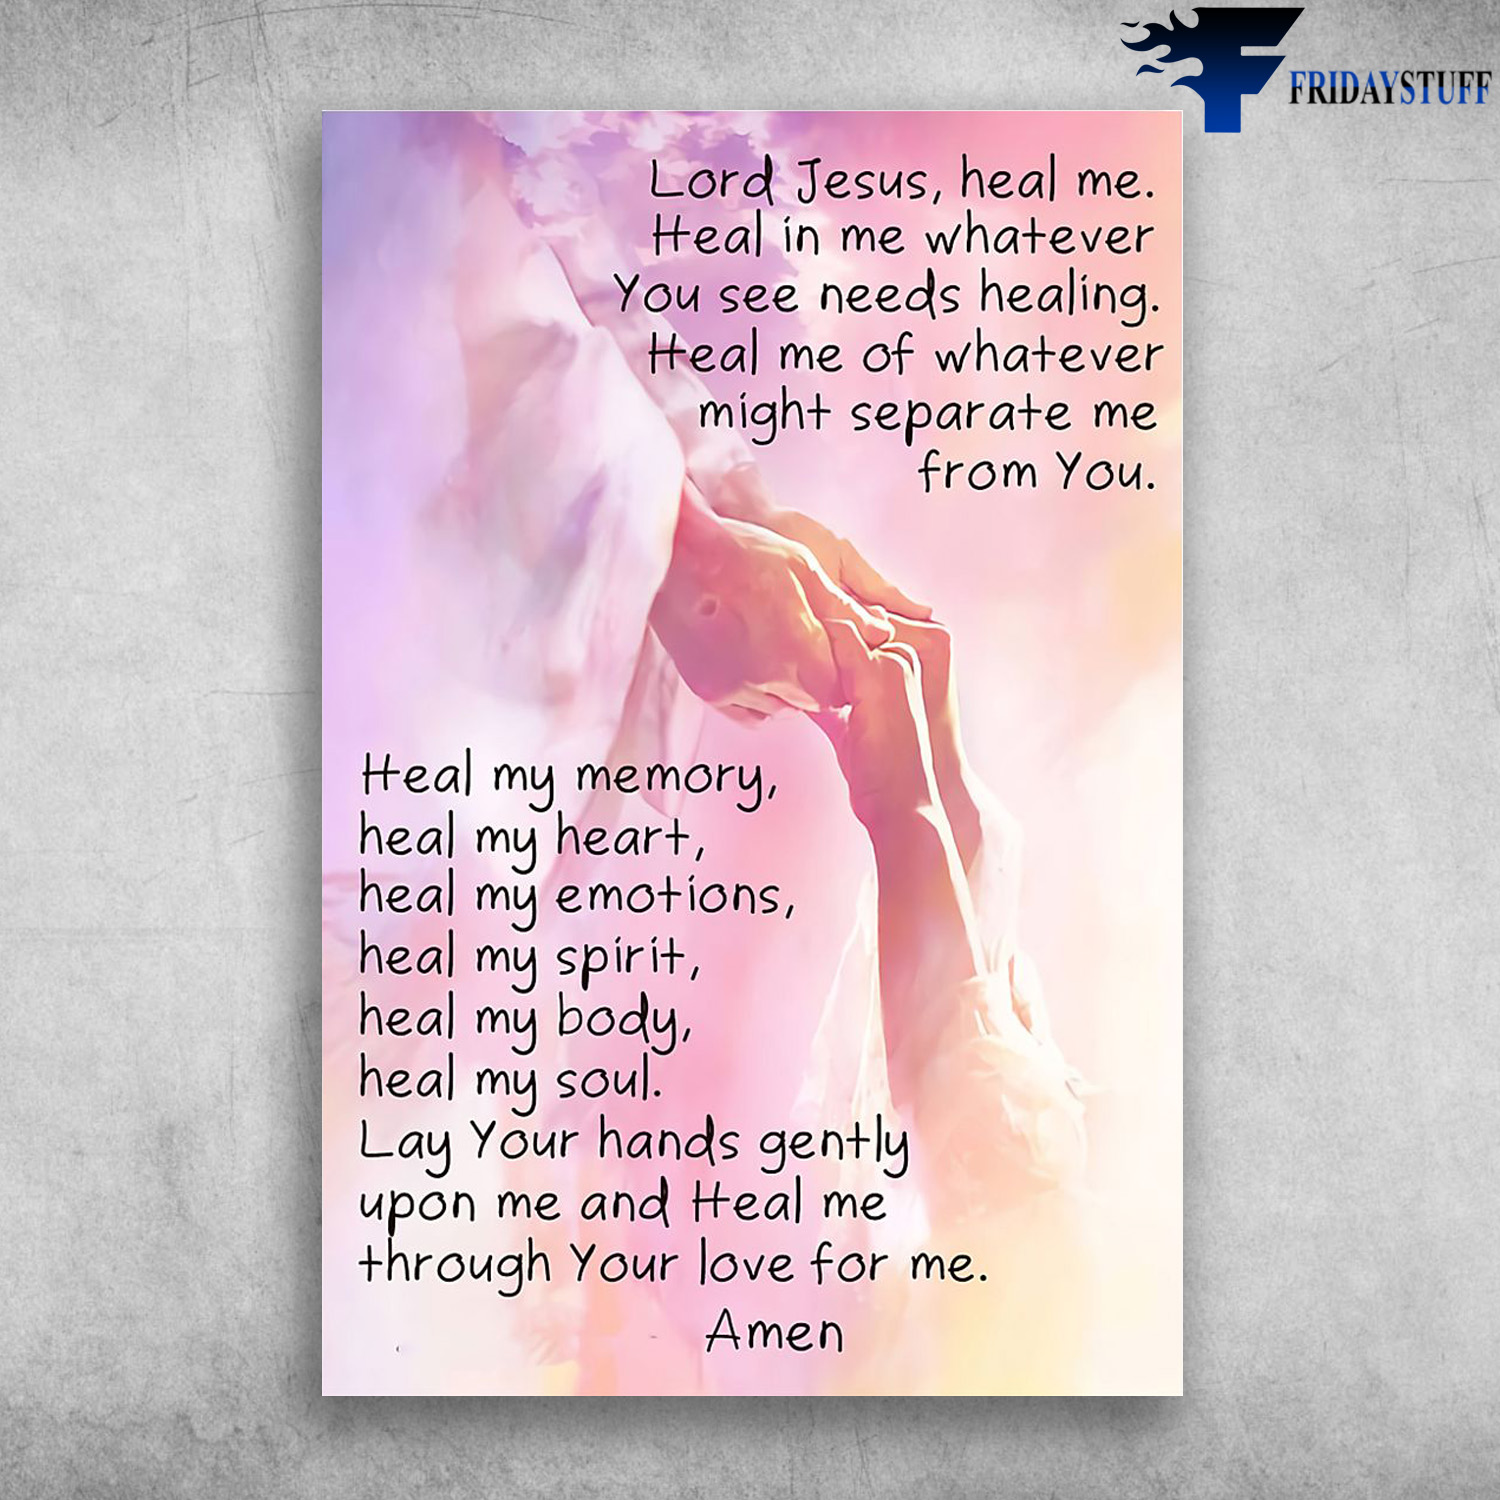 God, Take My Hand - Lord Jesus, heal Me, Heal In Me Whatever, You See Needs Healing,Heal Me Of Whatever, Might Separate Me From You, Heal Me Memory, Heal My Heart, Heal My Emotions, Heal My Spirit, Heal My Body, Heal My Soul